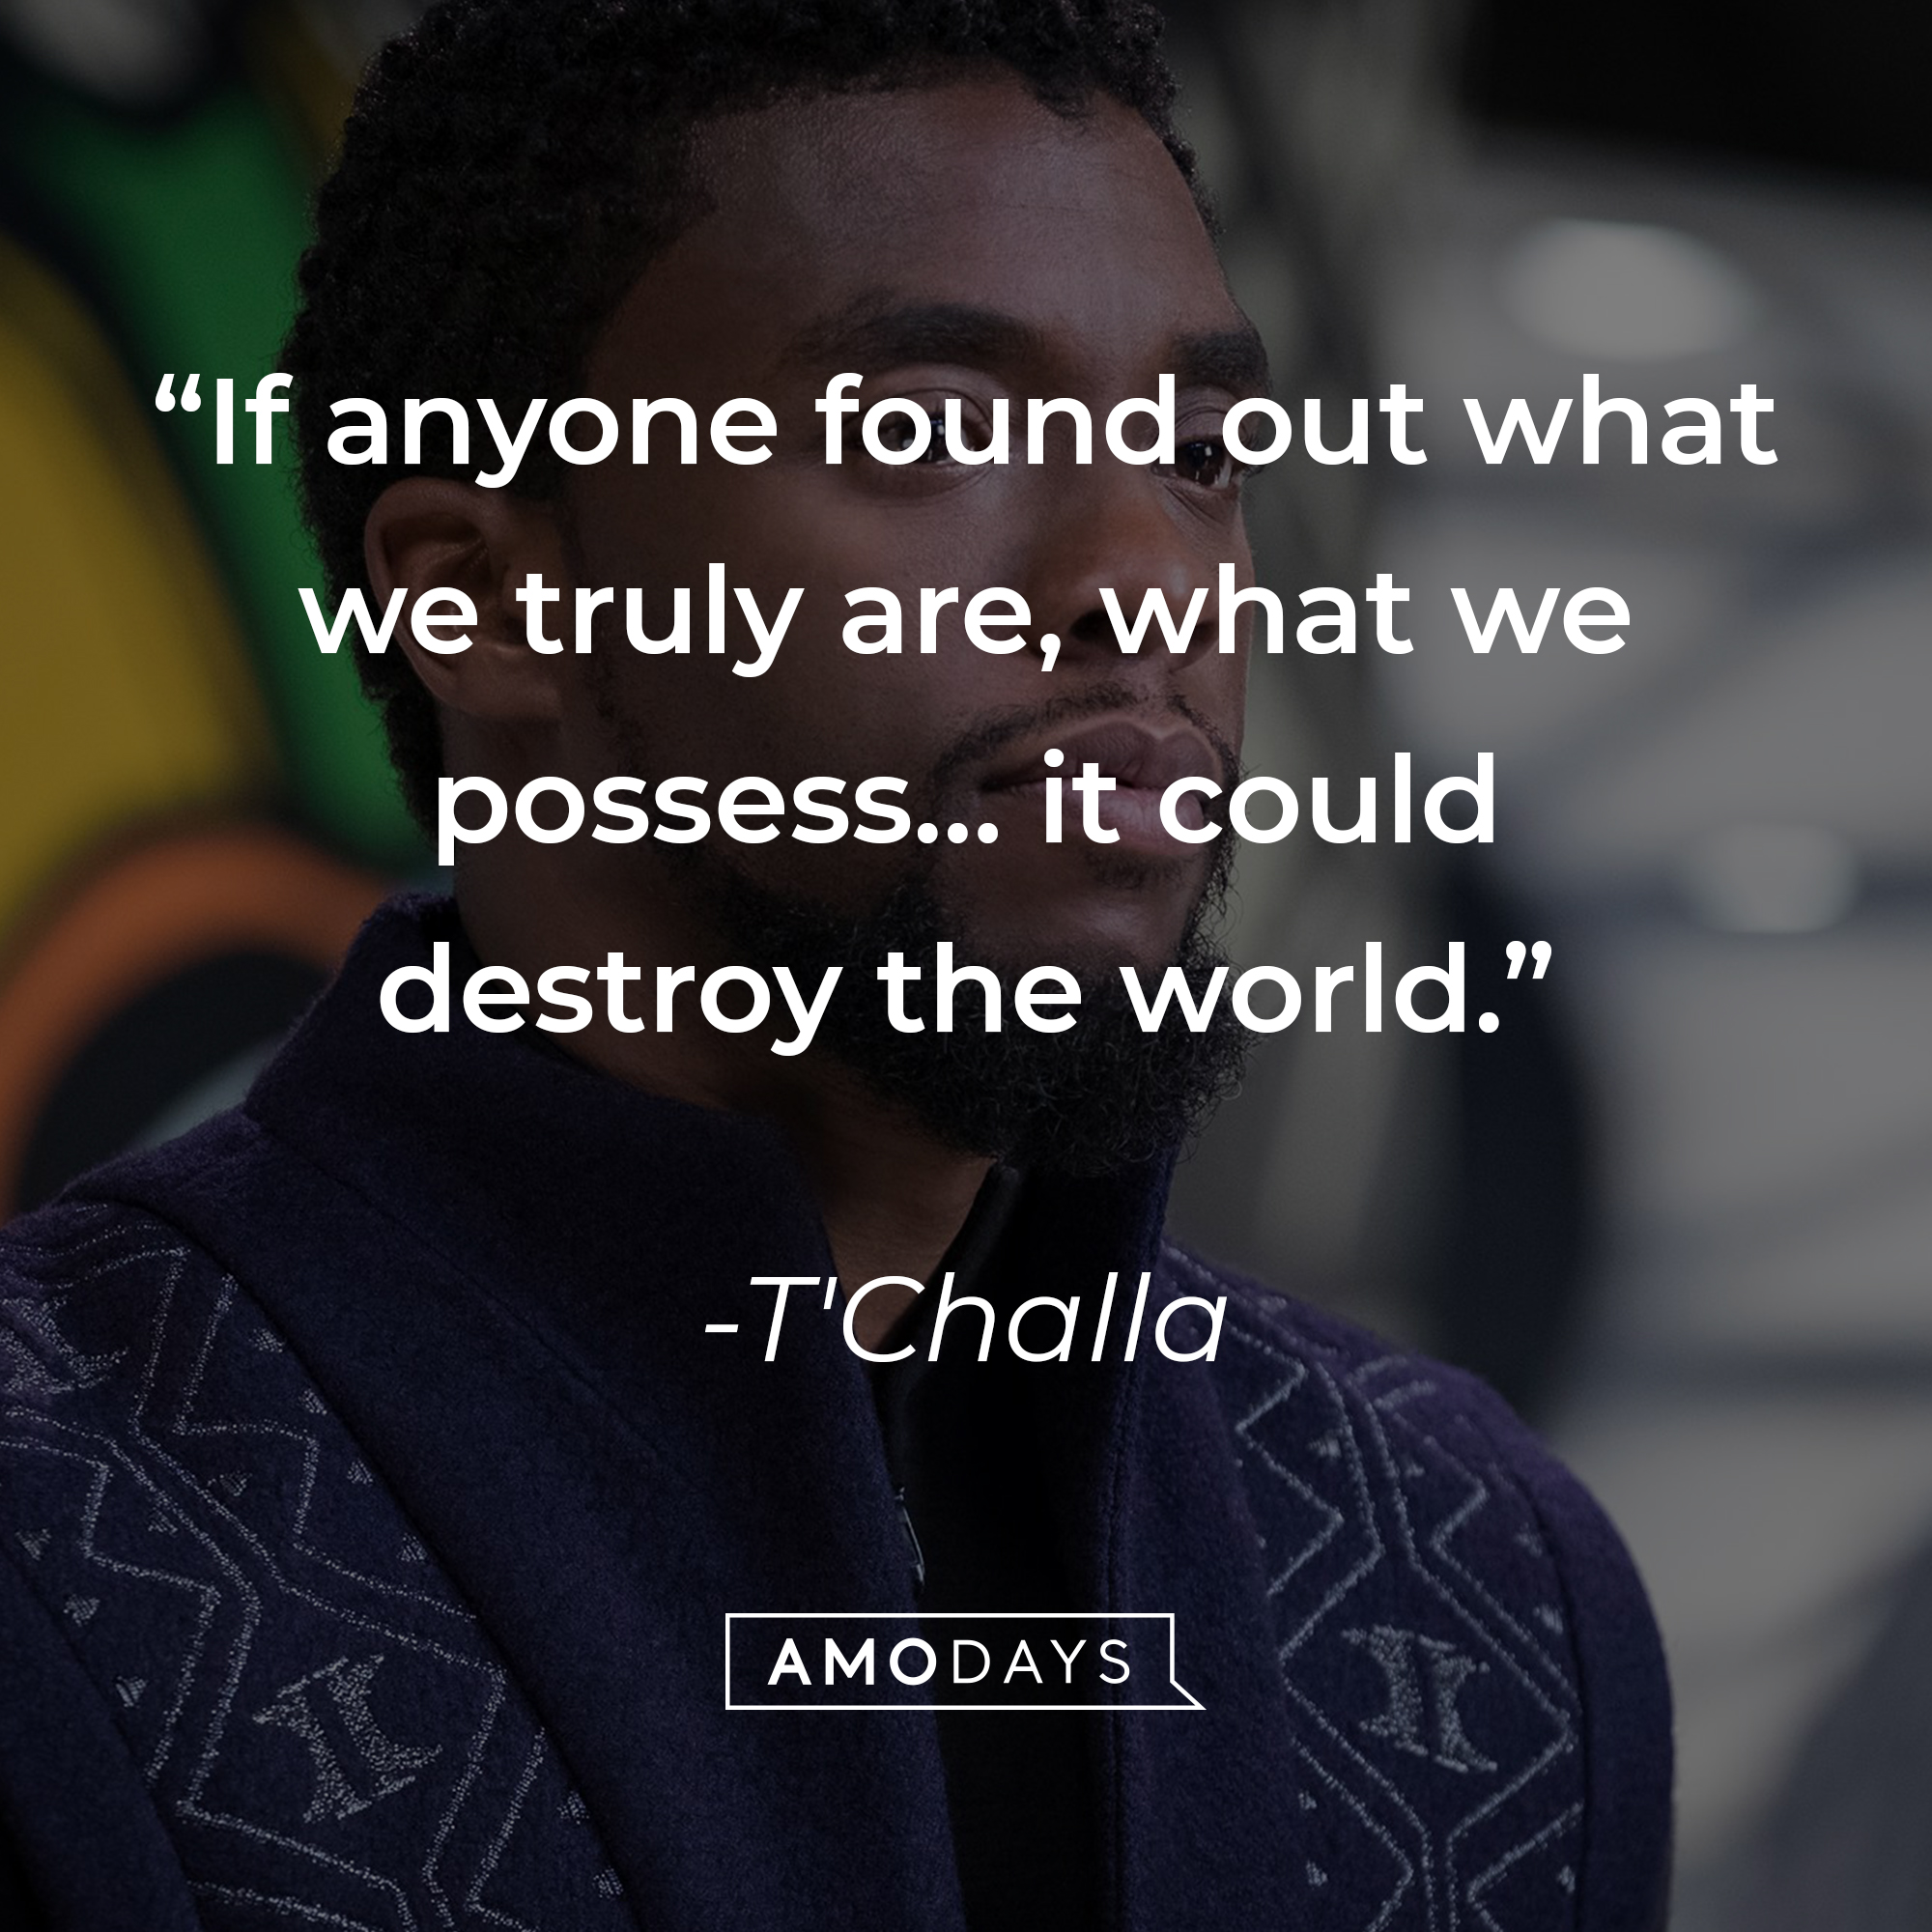 T'Challa's quote: “If anyone found out what we truly are, what we possess… it could destroy the world.” | Source: facebook.com/BlackPantherMovie